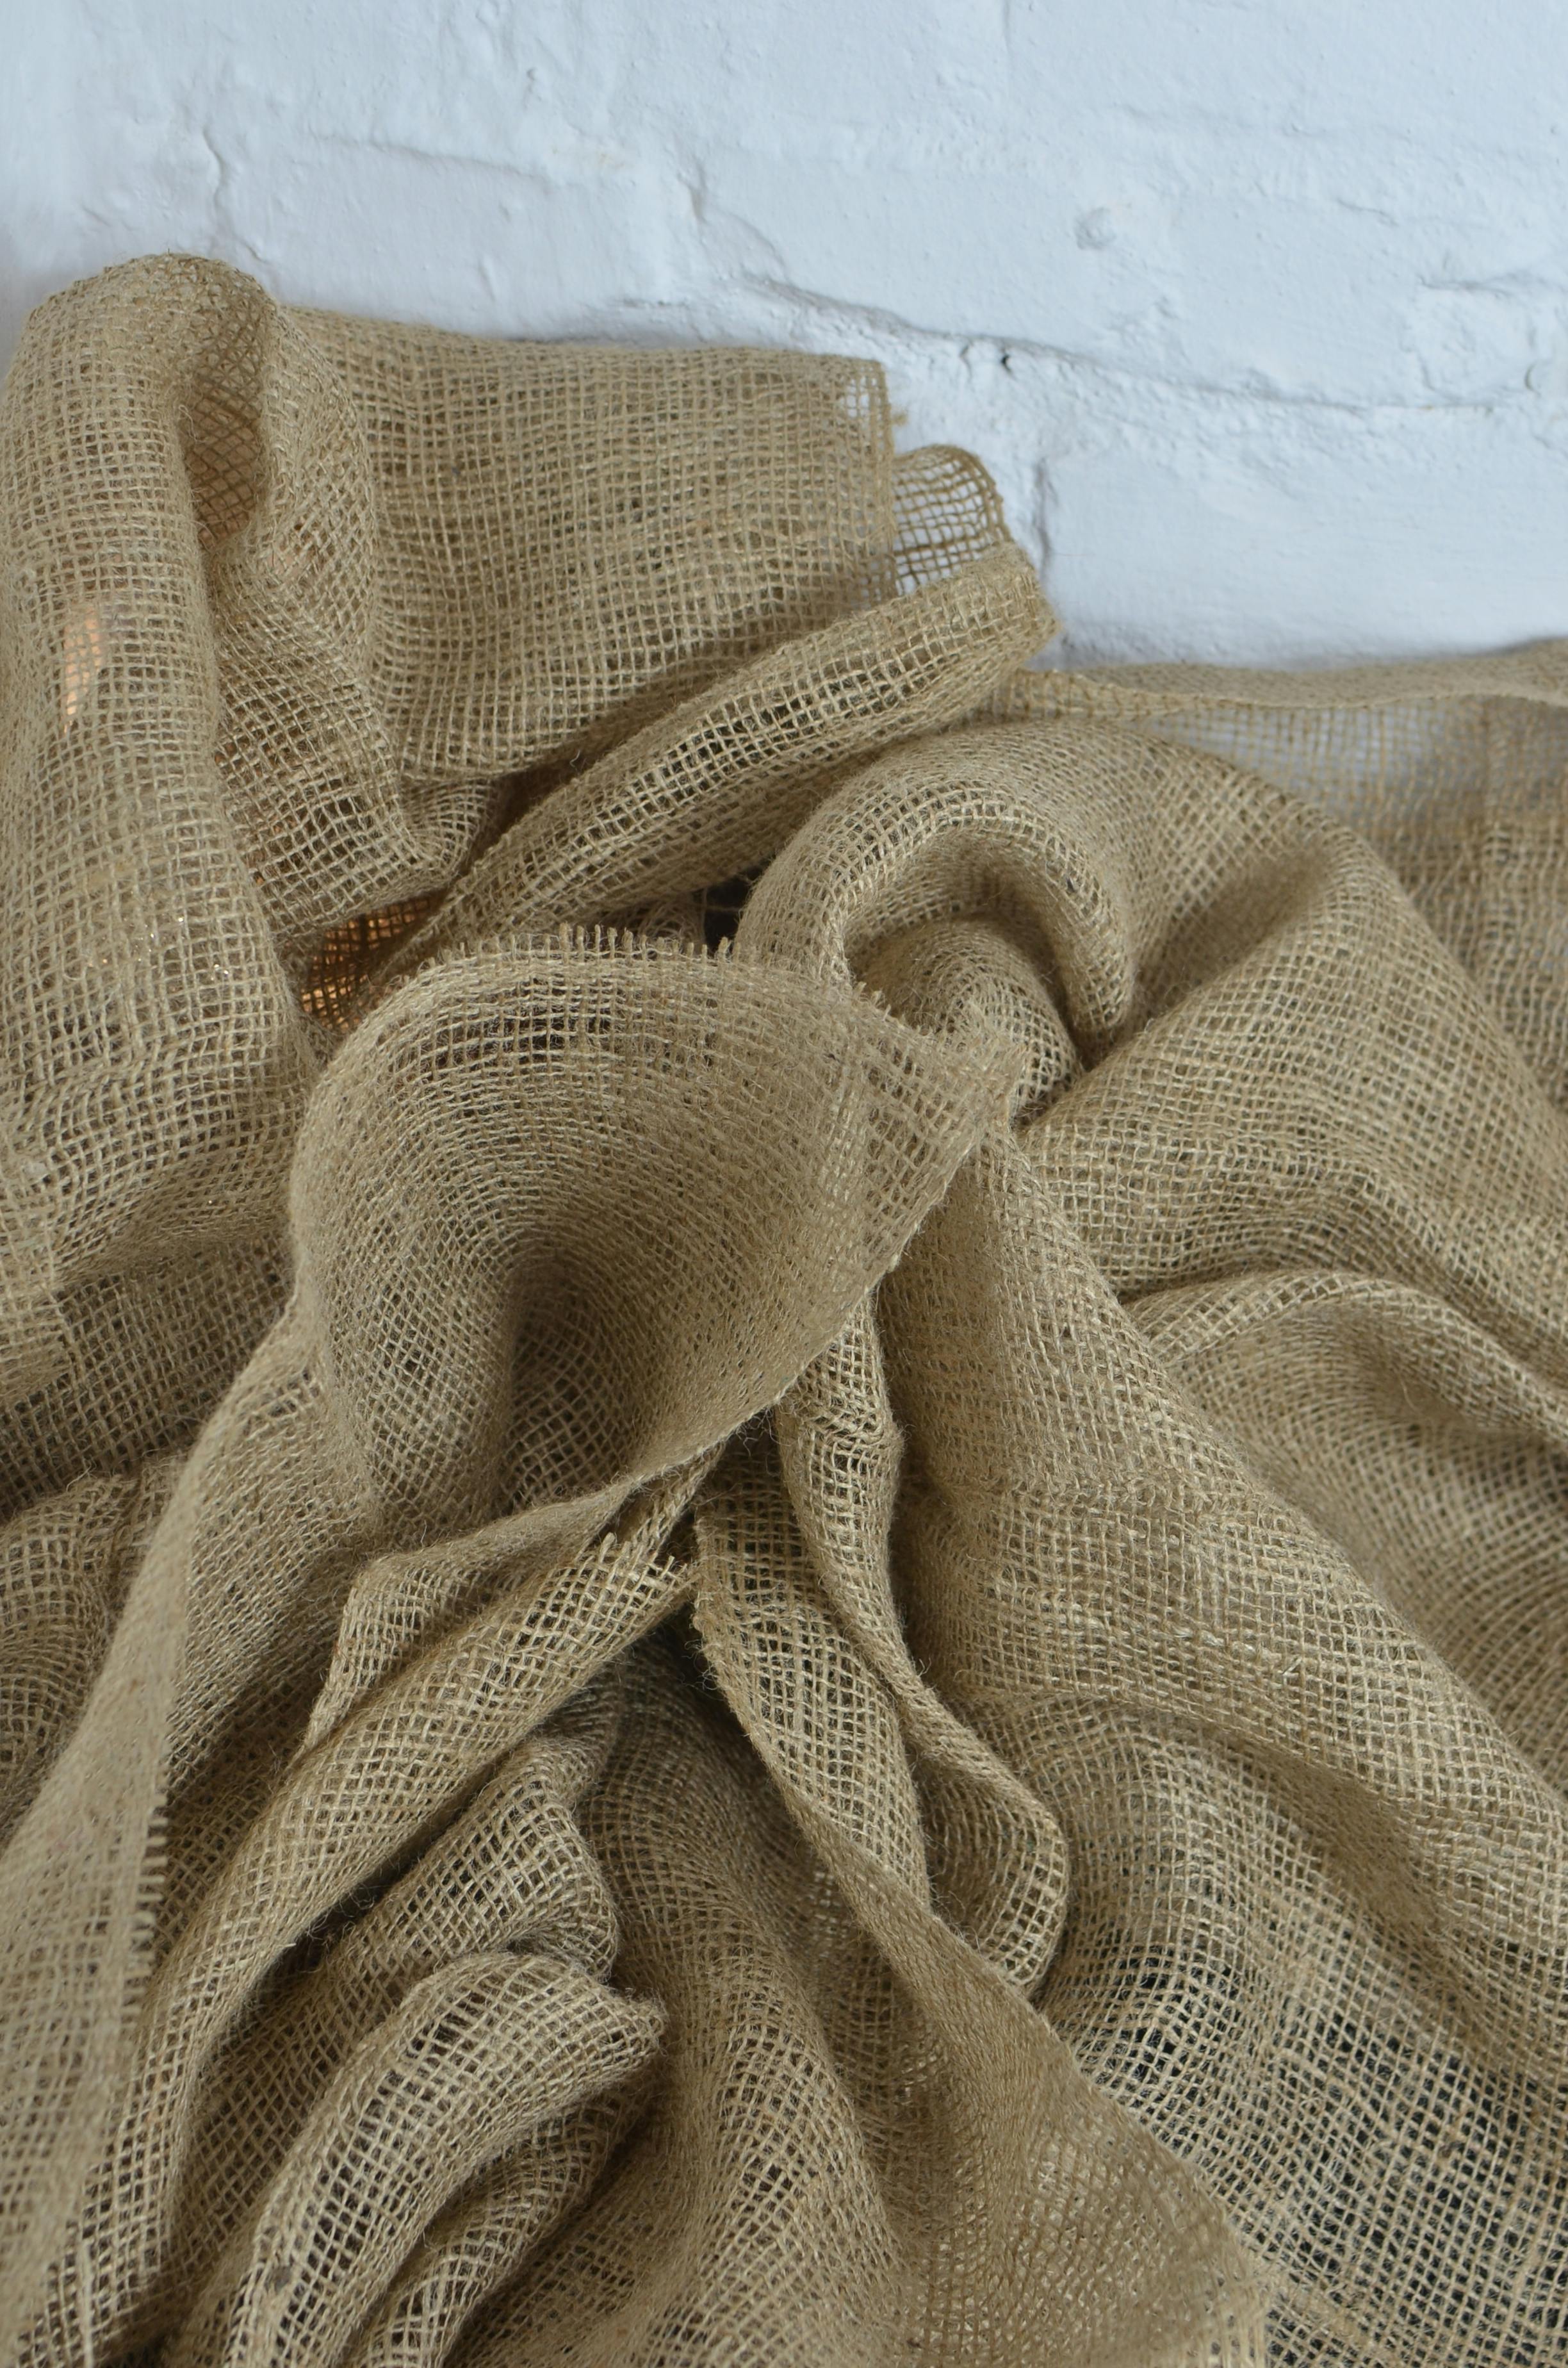 Sackcloth Material Stock Photo, Picture and Royalty Free Image